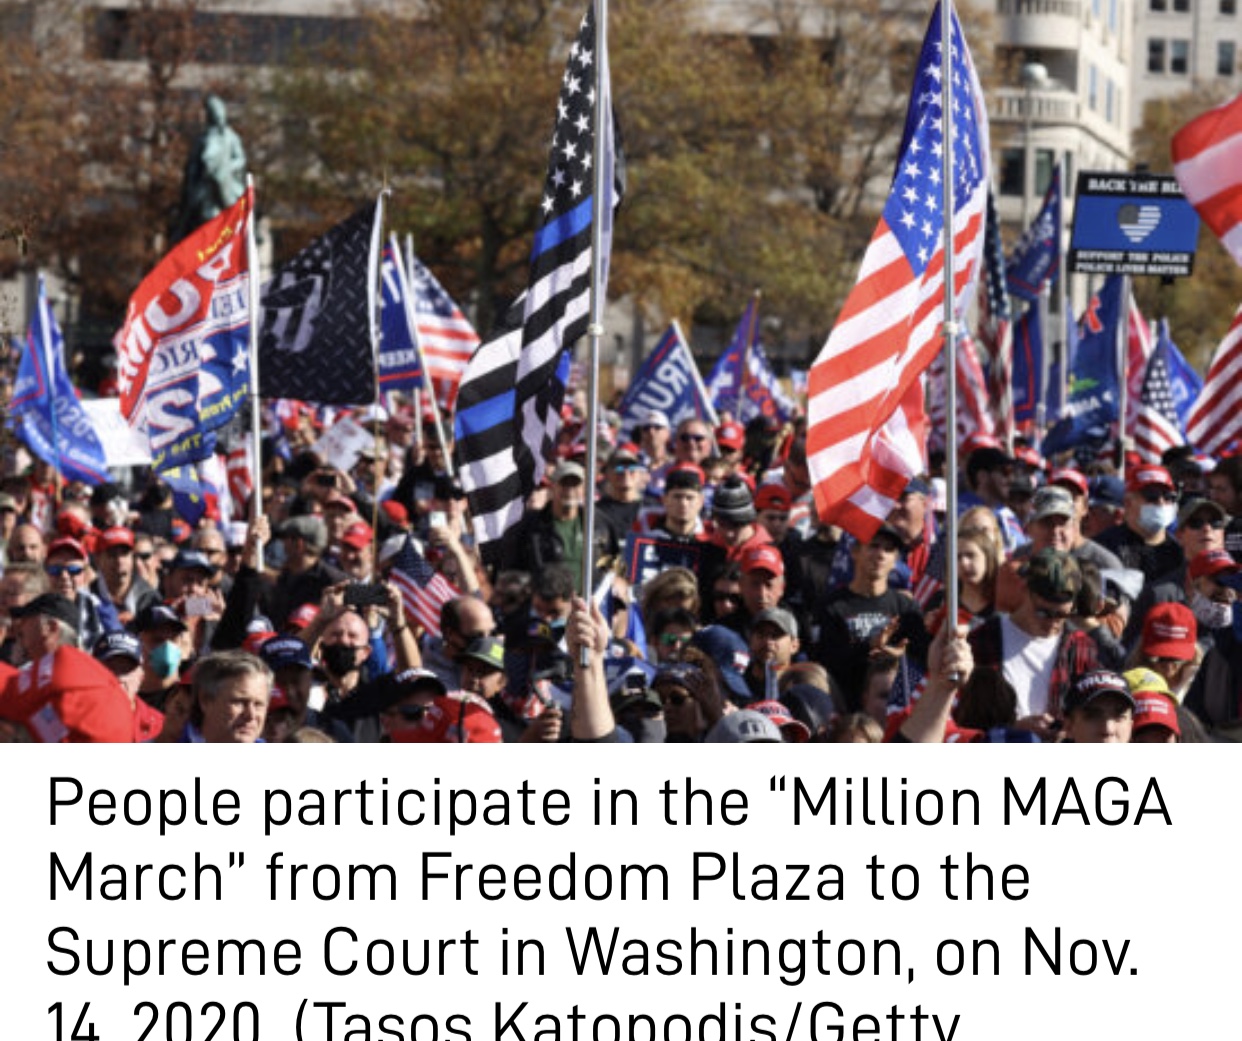 Massive Crowds of People March in DC to Show Support for Trump, Demand Election Integrity